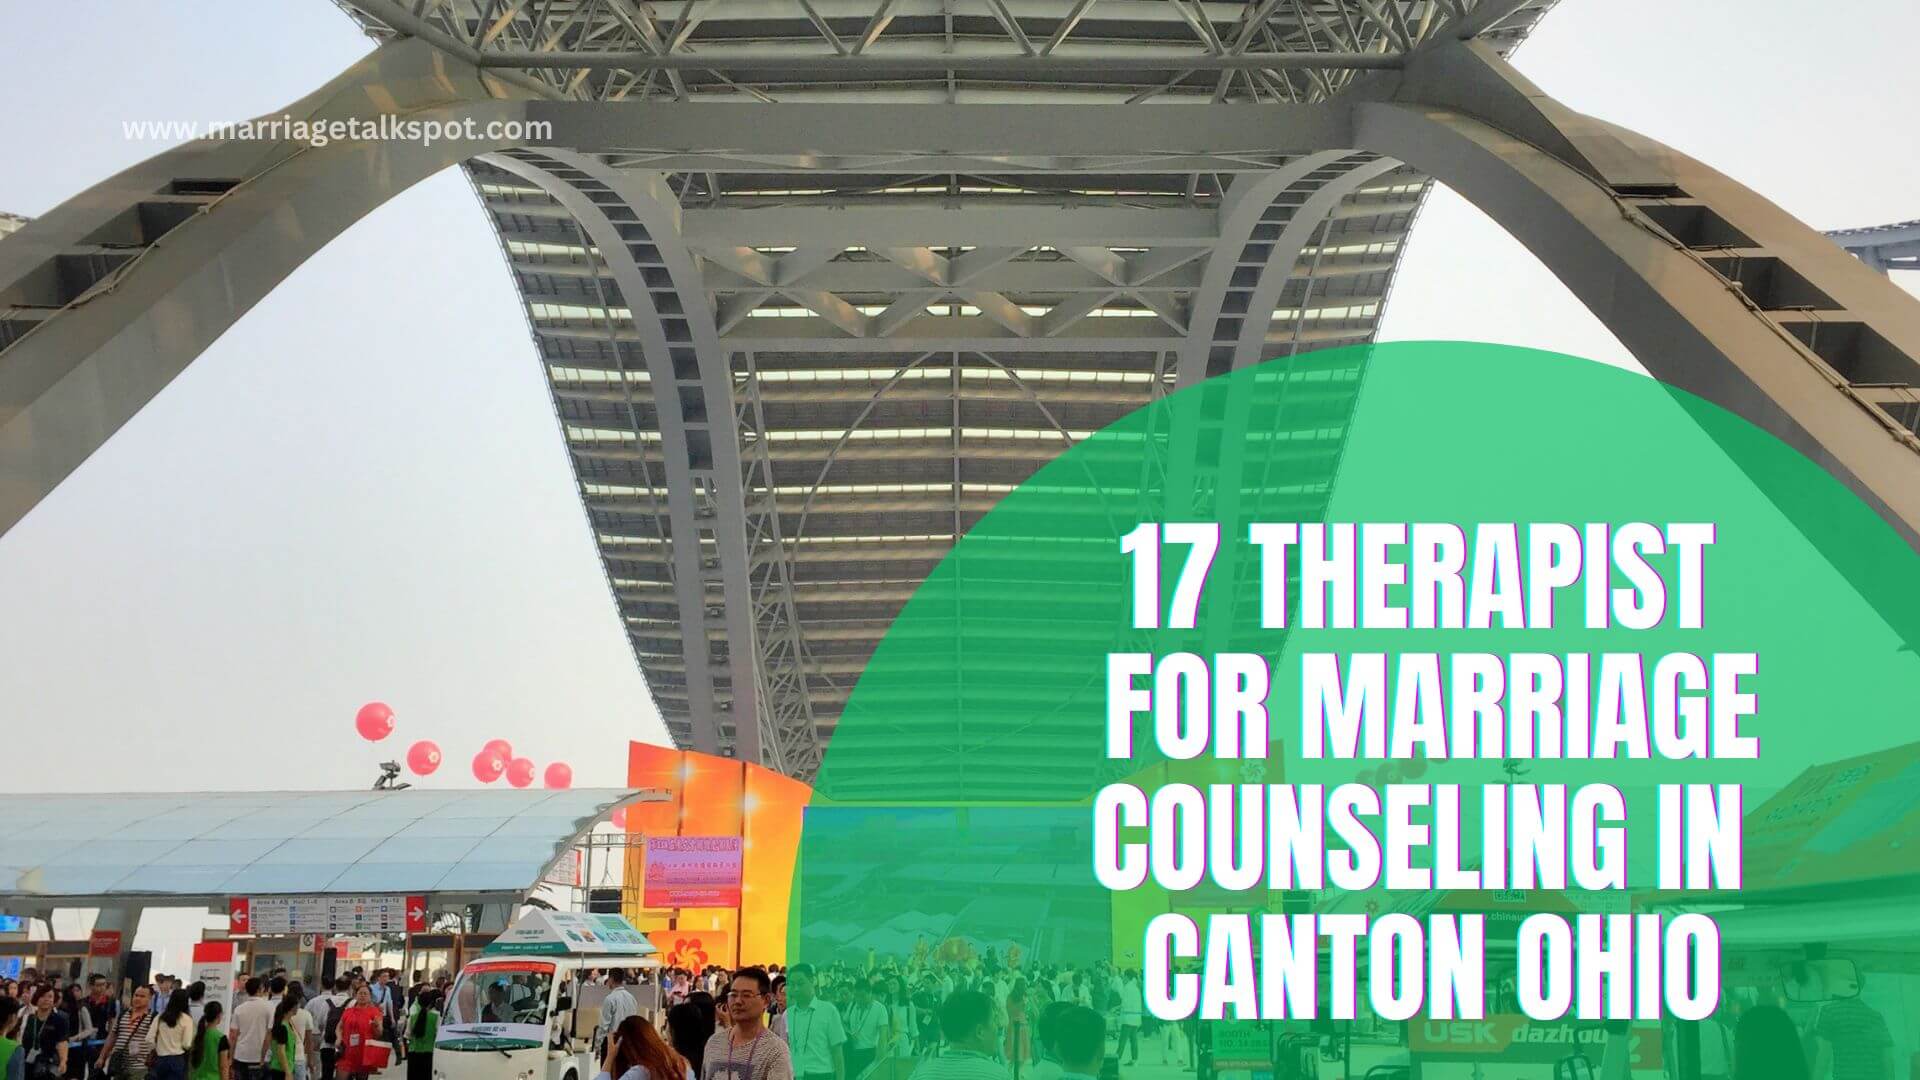 THERAPIST FOR MARRIAGE COUNSELING IN CANTON OHIO (1)